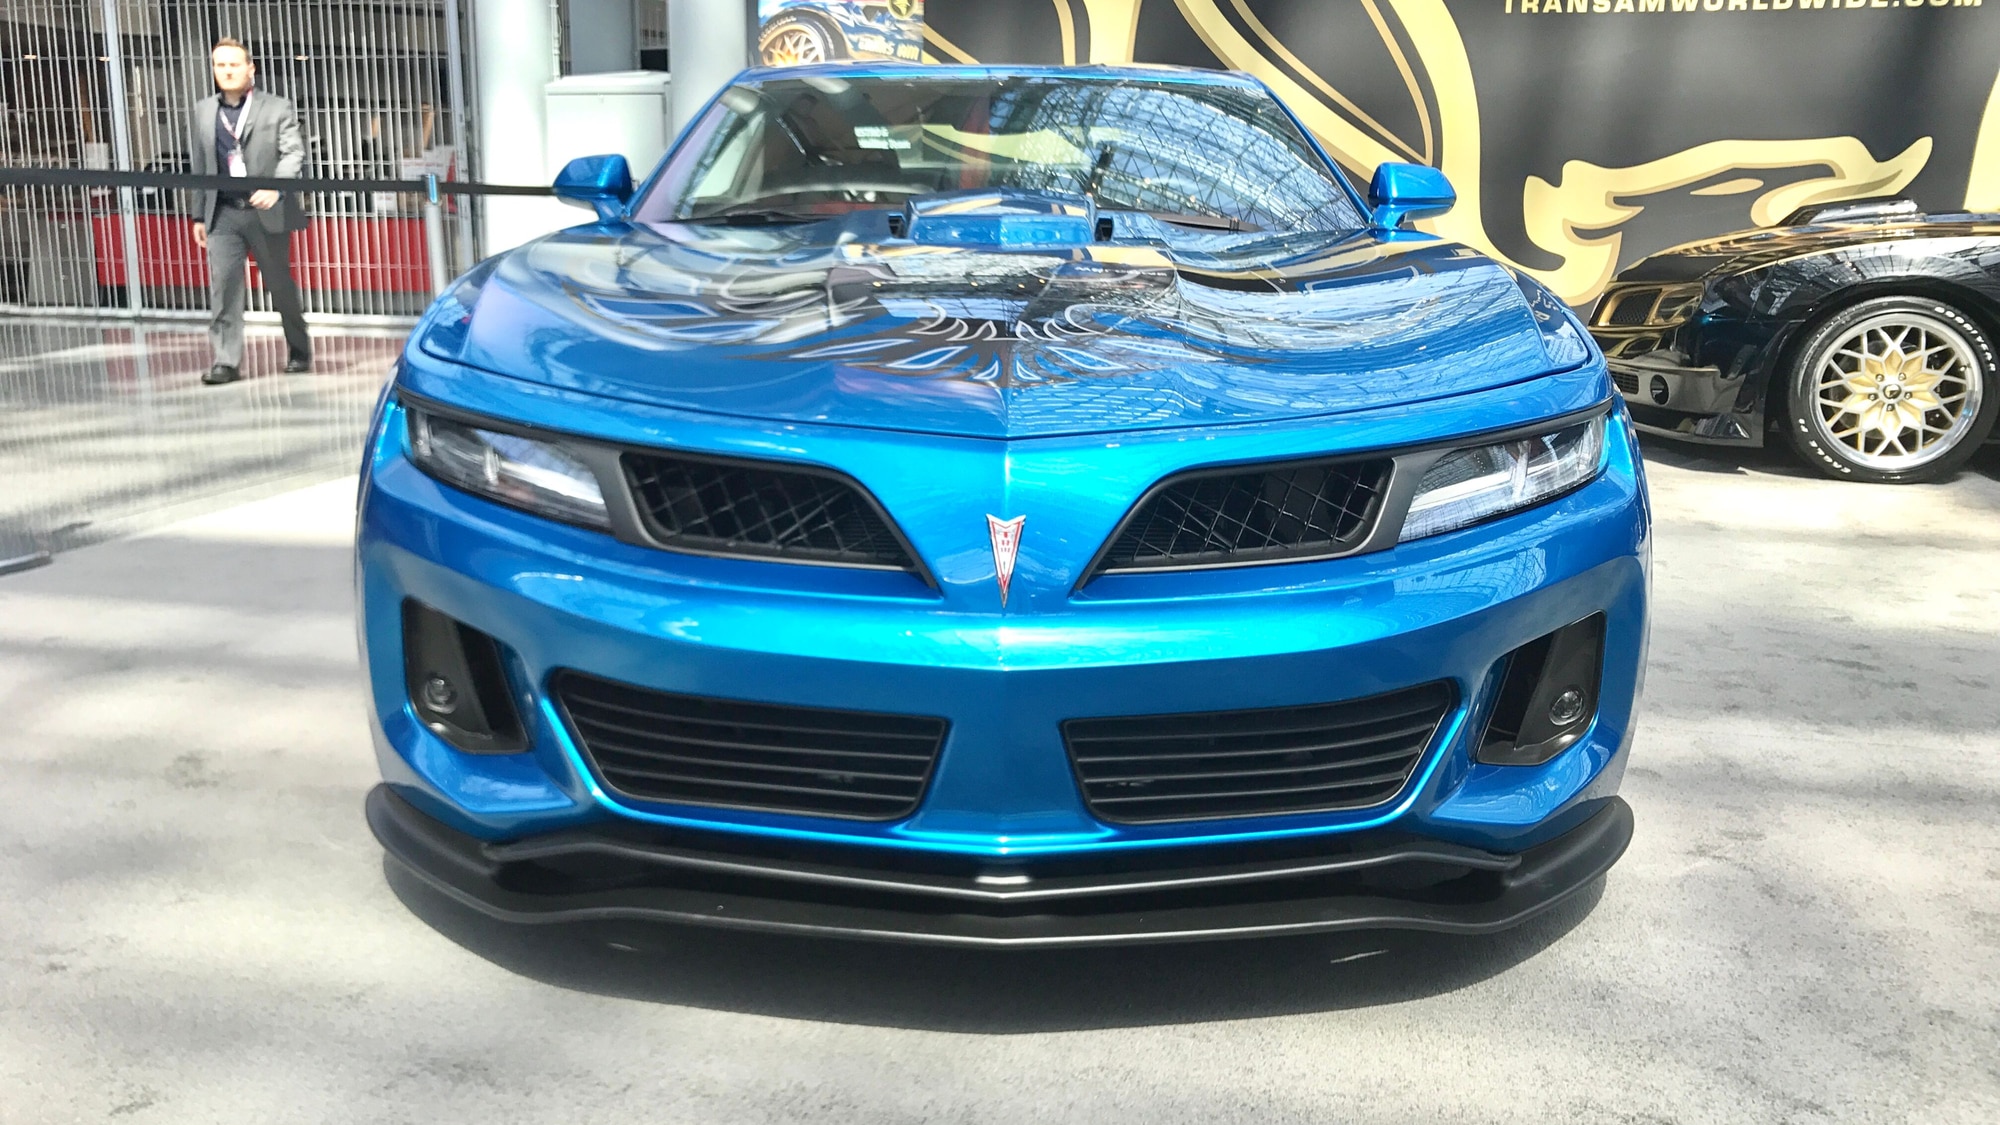 6th-gen Camaro Trans Am conversion comes packing 1,000 horsepower